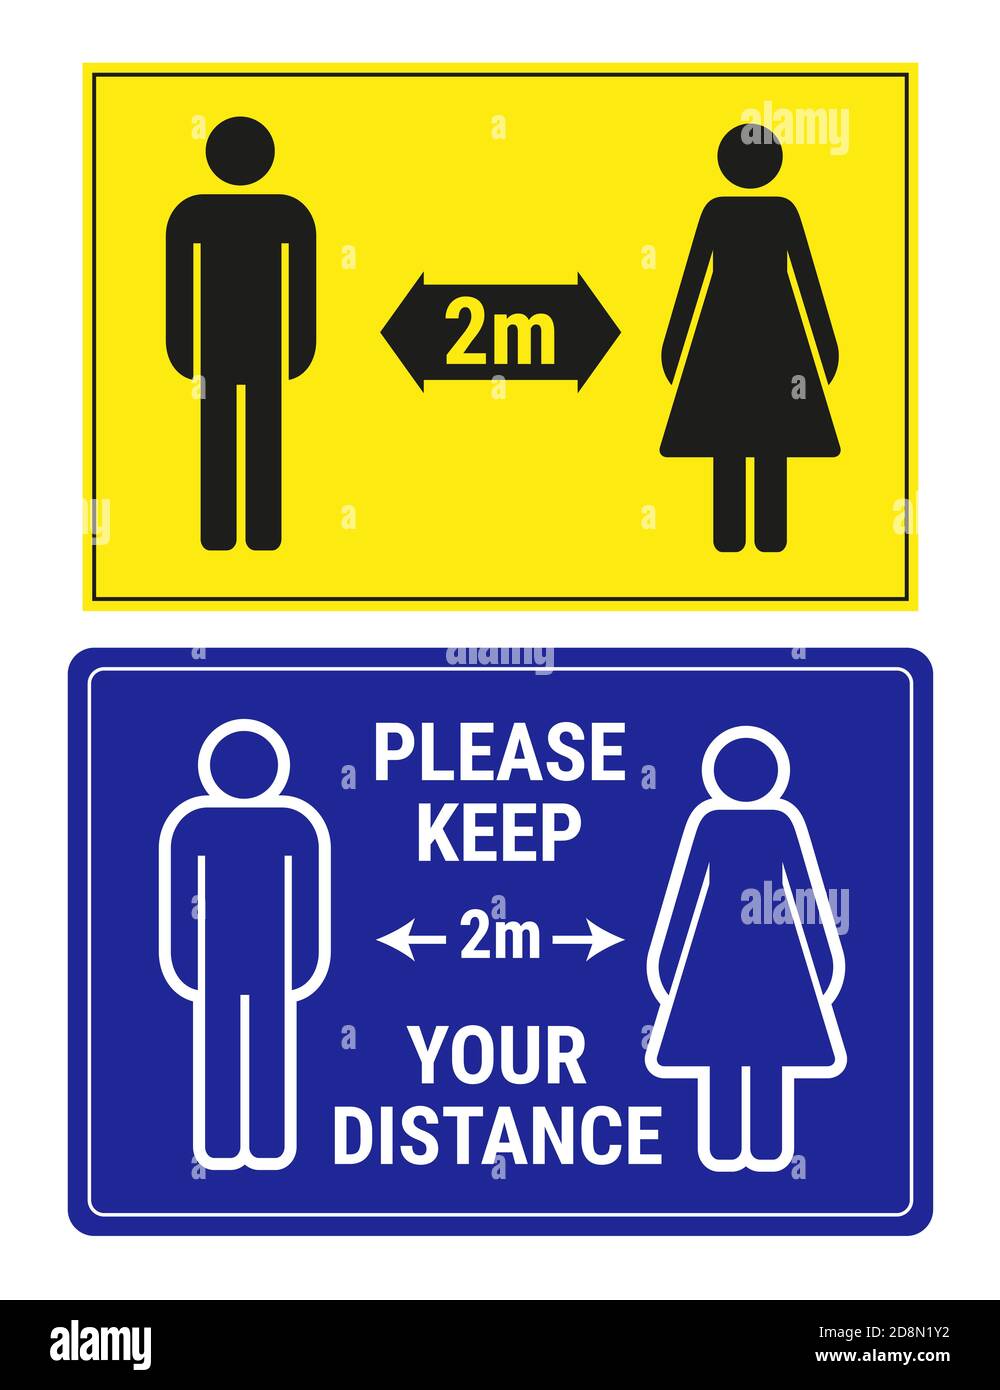 2 social distance signs, illustration. Please keep your distance 2 meters yellow and blue banners, man and woman icons. Stock Photo